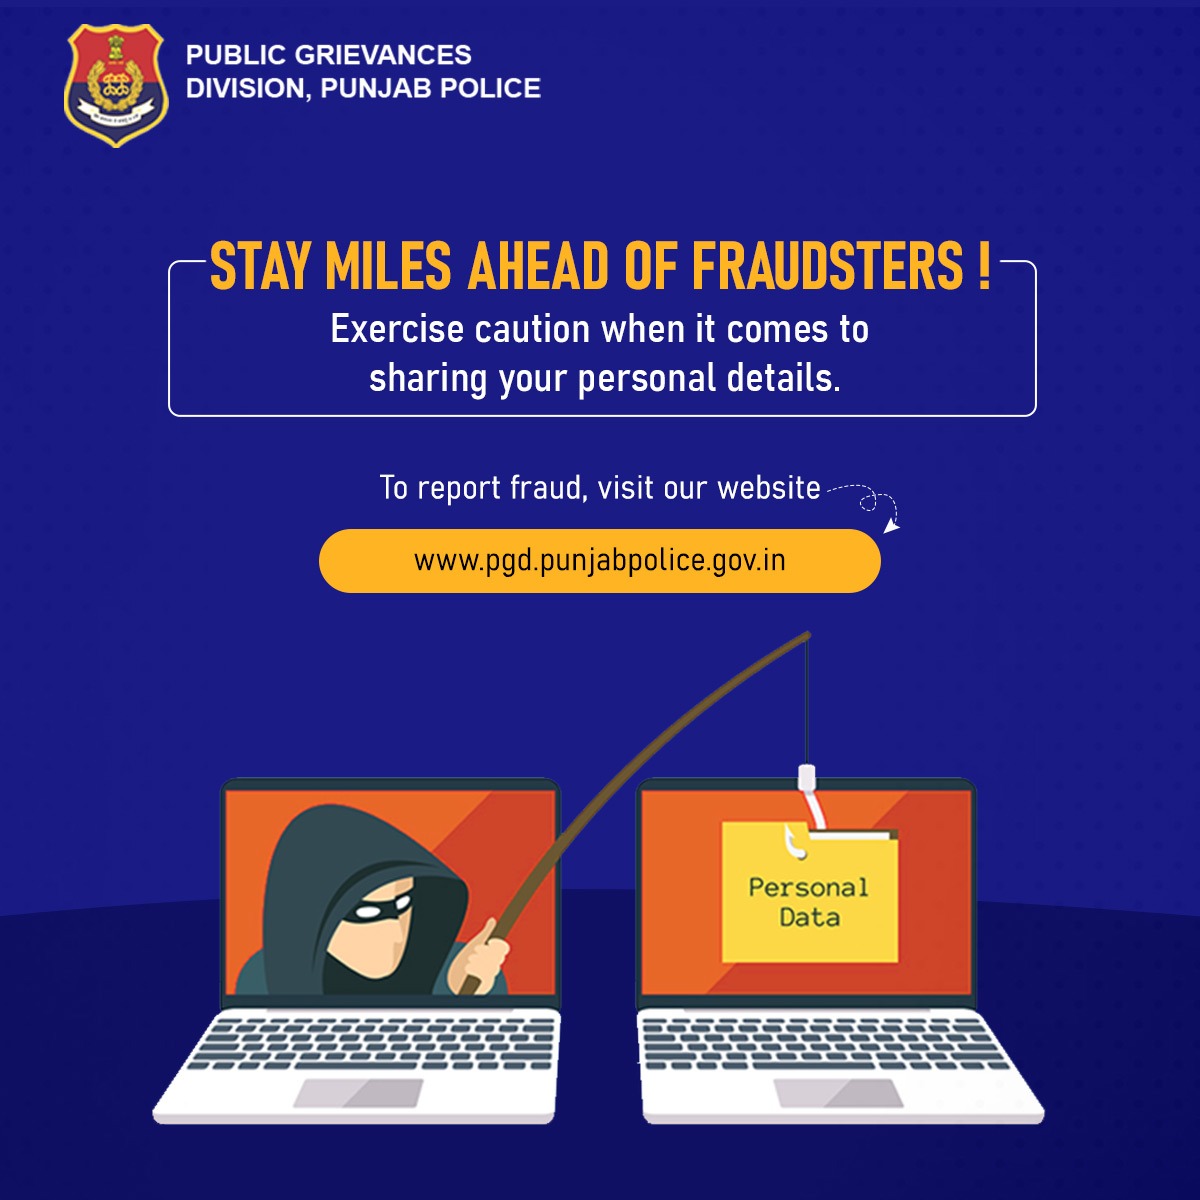 Don't fall for the trap, stay away from fraudsters!⚠️
---
In case of any mishappening, report your file at - pgd.punjabpolice.gov.in
.
.
.
.
#fraudsters #caution #pgd #punjabpolice #drugfreeyouth #drugfreepunjab #saynotodrug #onlinesupport #onlinecomplaints